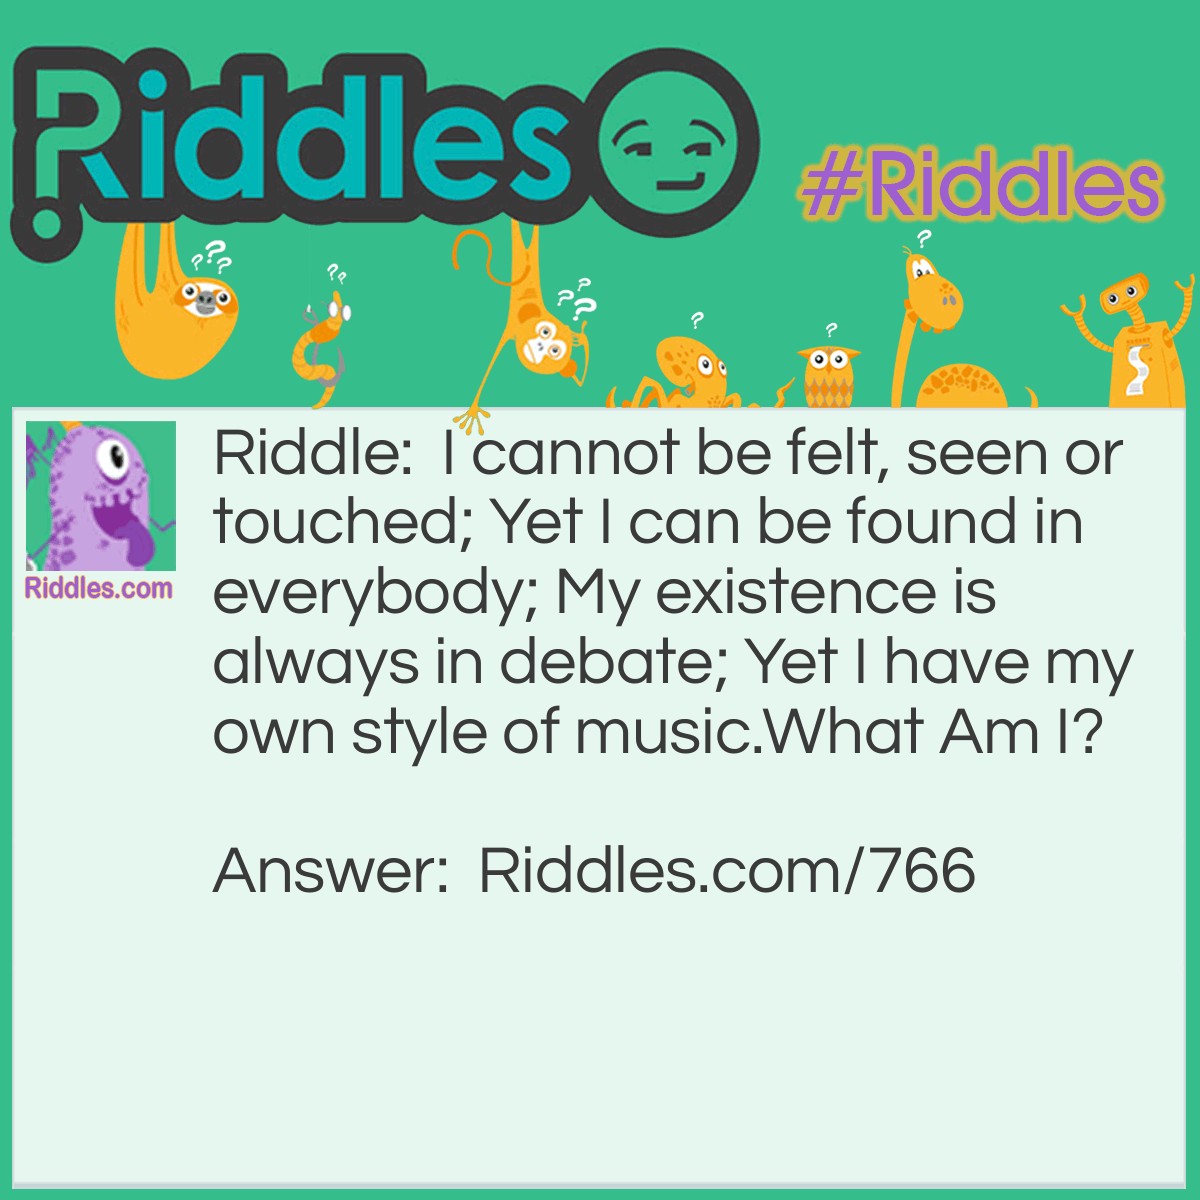 Riddle: I cannot be felt, seen or touched; Yet I can be found in everybody; My existence is always in debate, Yet I have my own style of music.
What Am I? Answer: I am a soul.